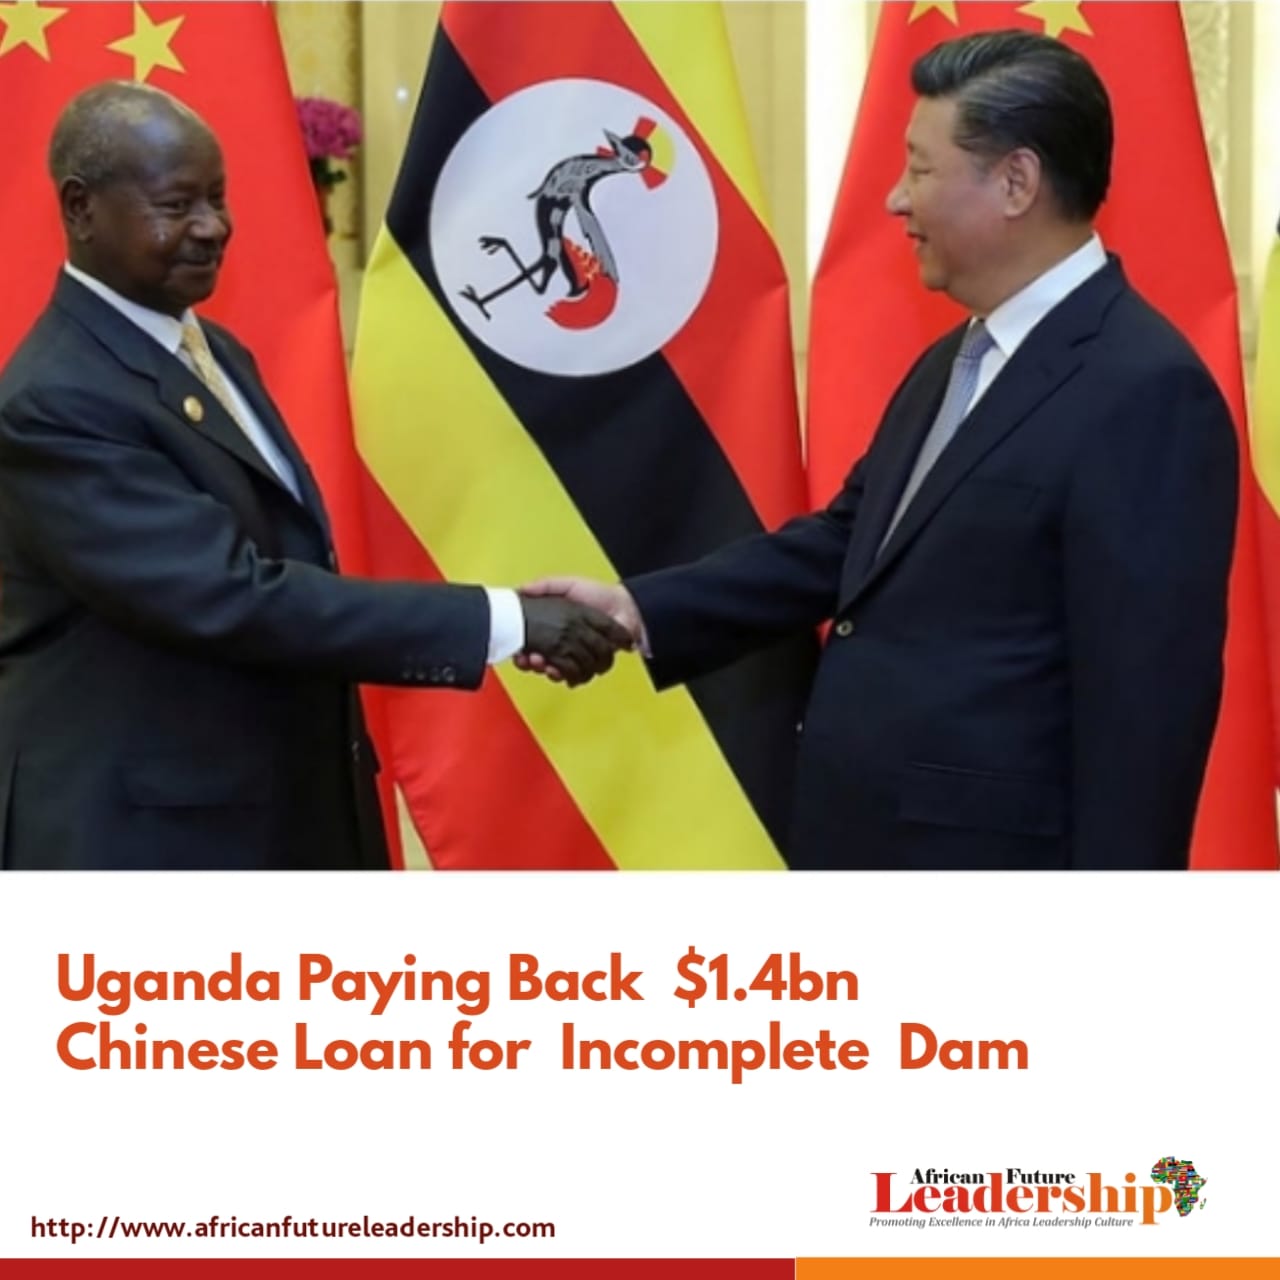 Uganda Paying Back $1.4bn Chinese Loan for Incomplete Dam